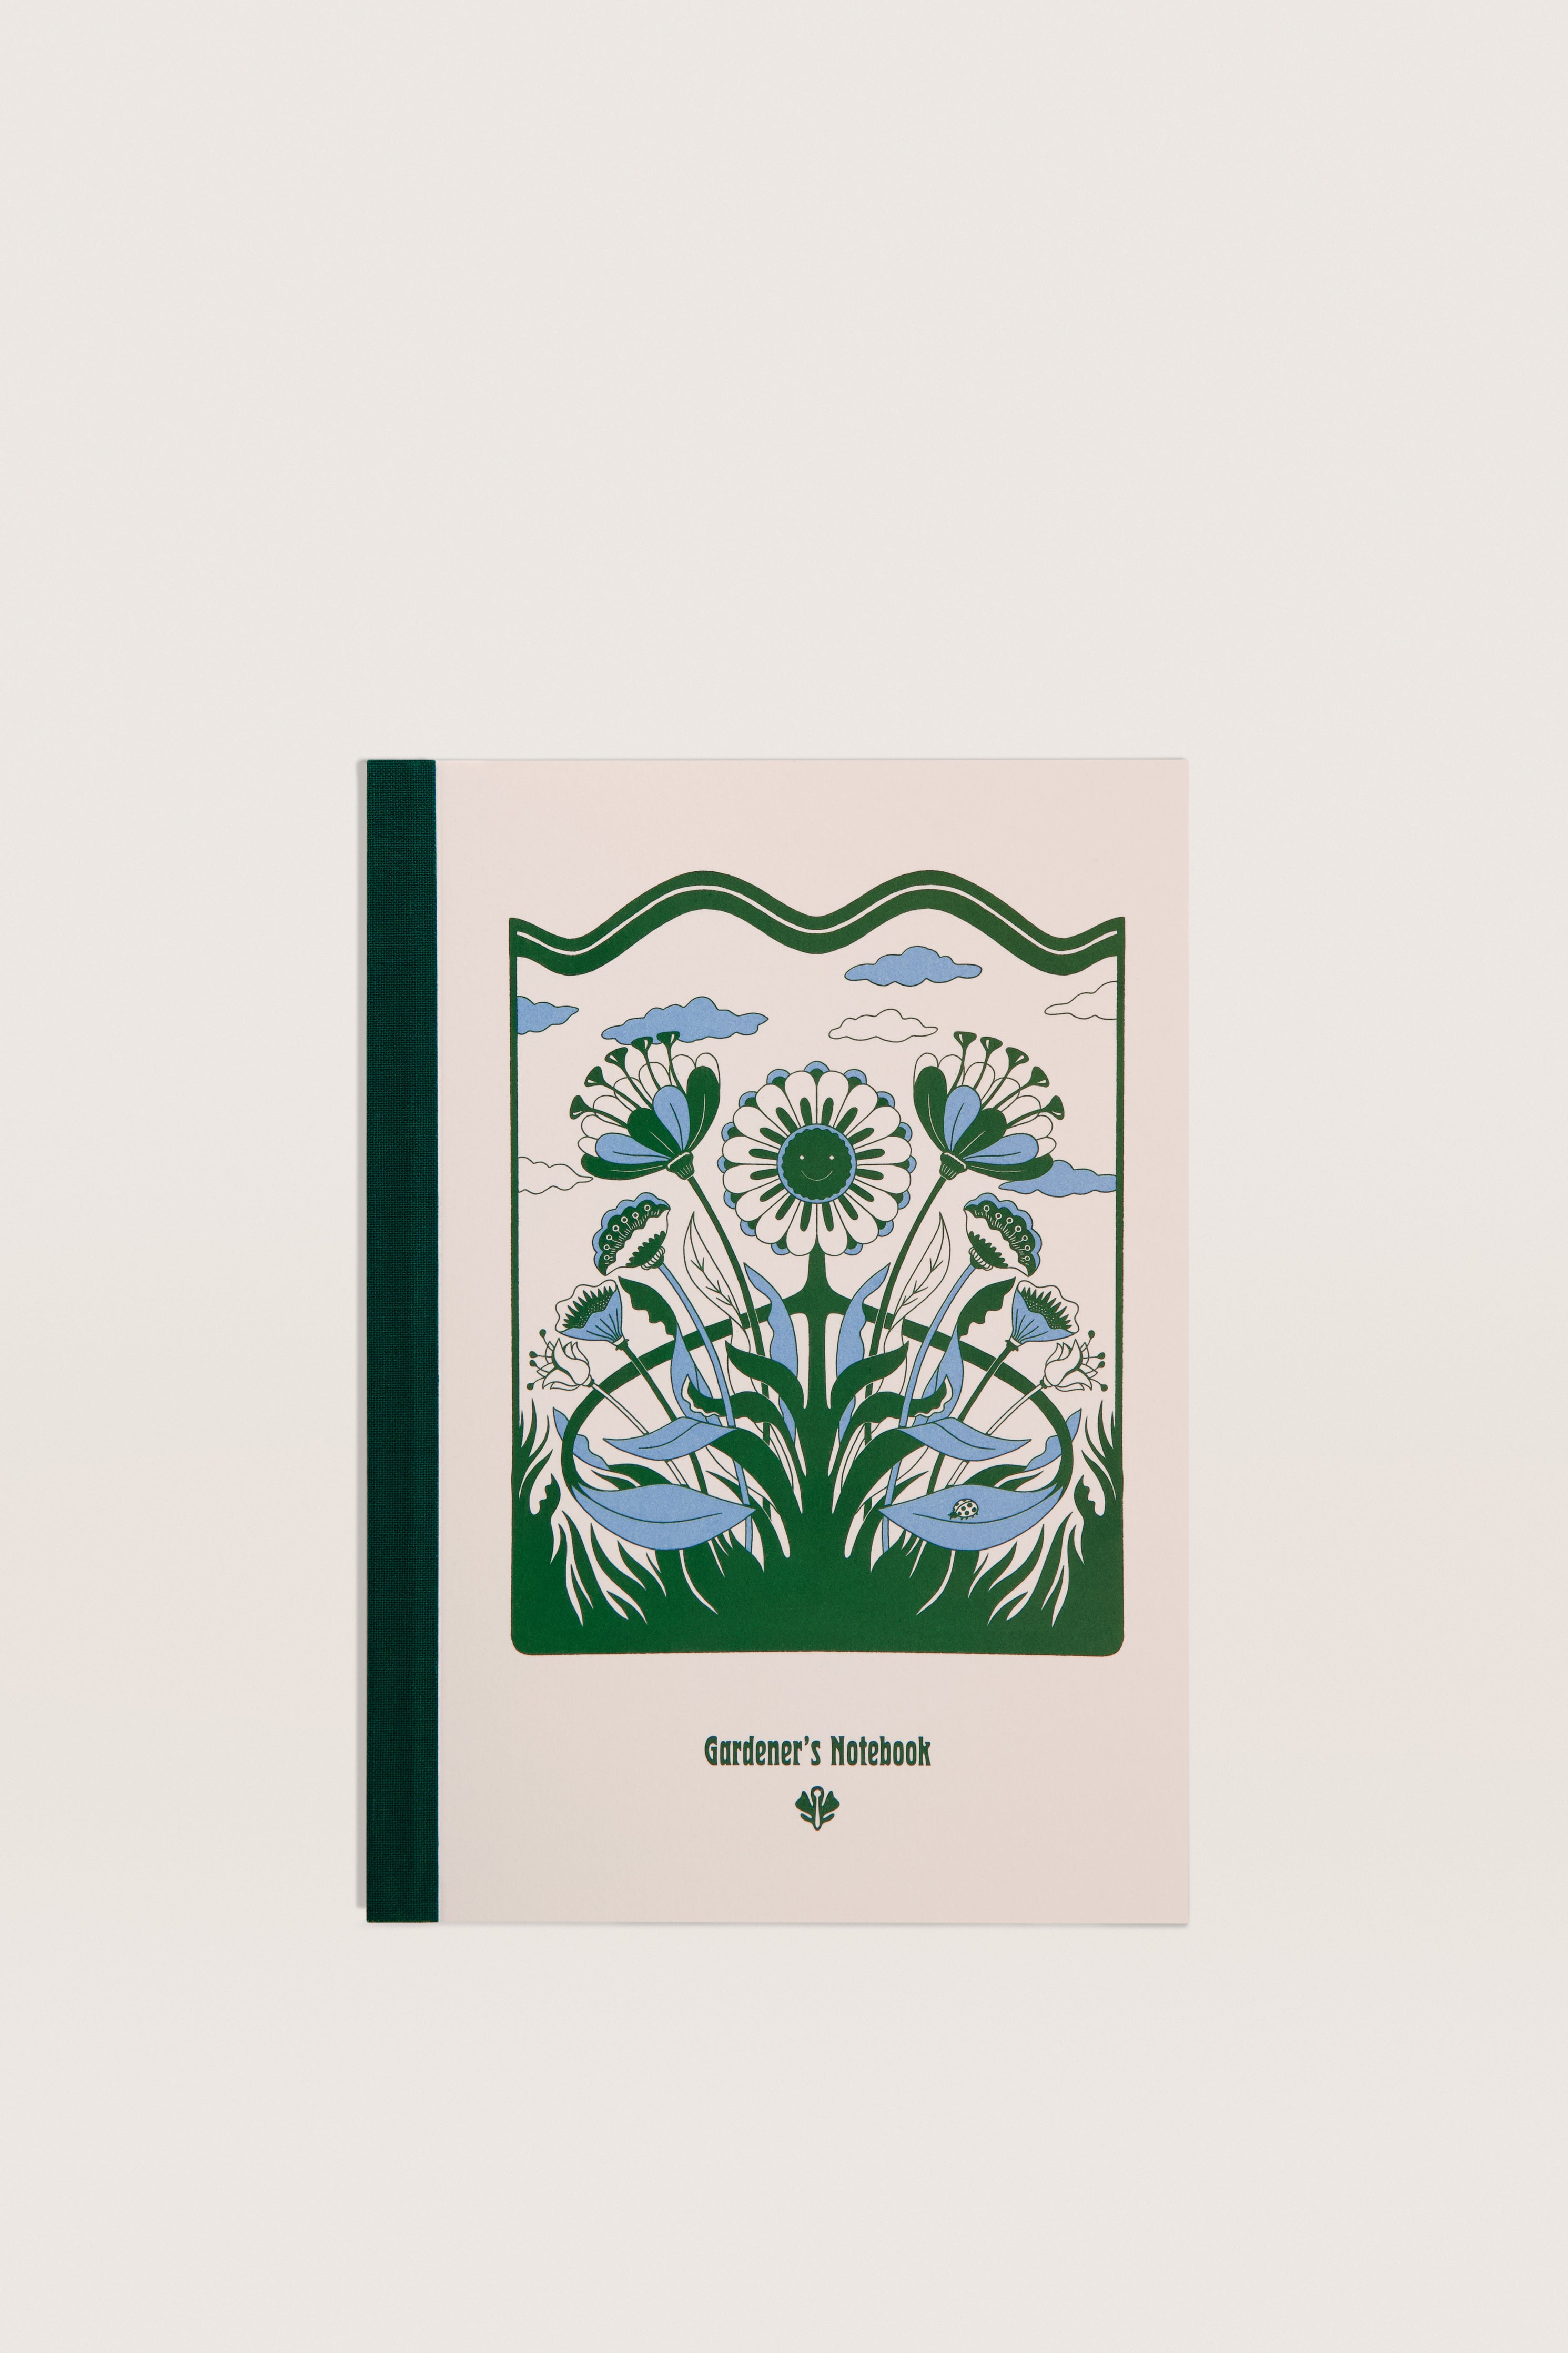 Sowvital A5 size notebook with flowers blooming theme.